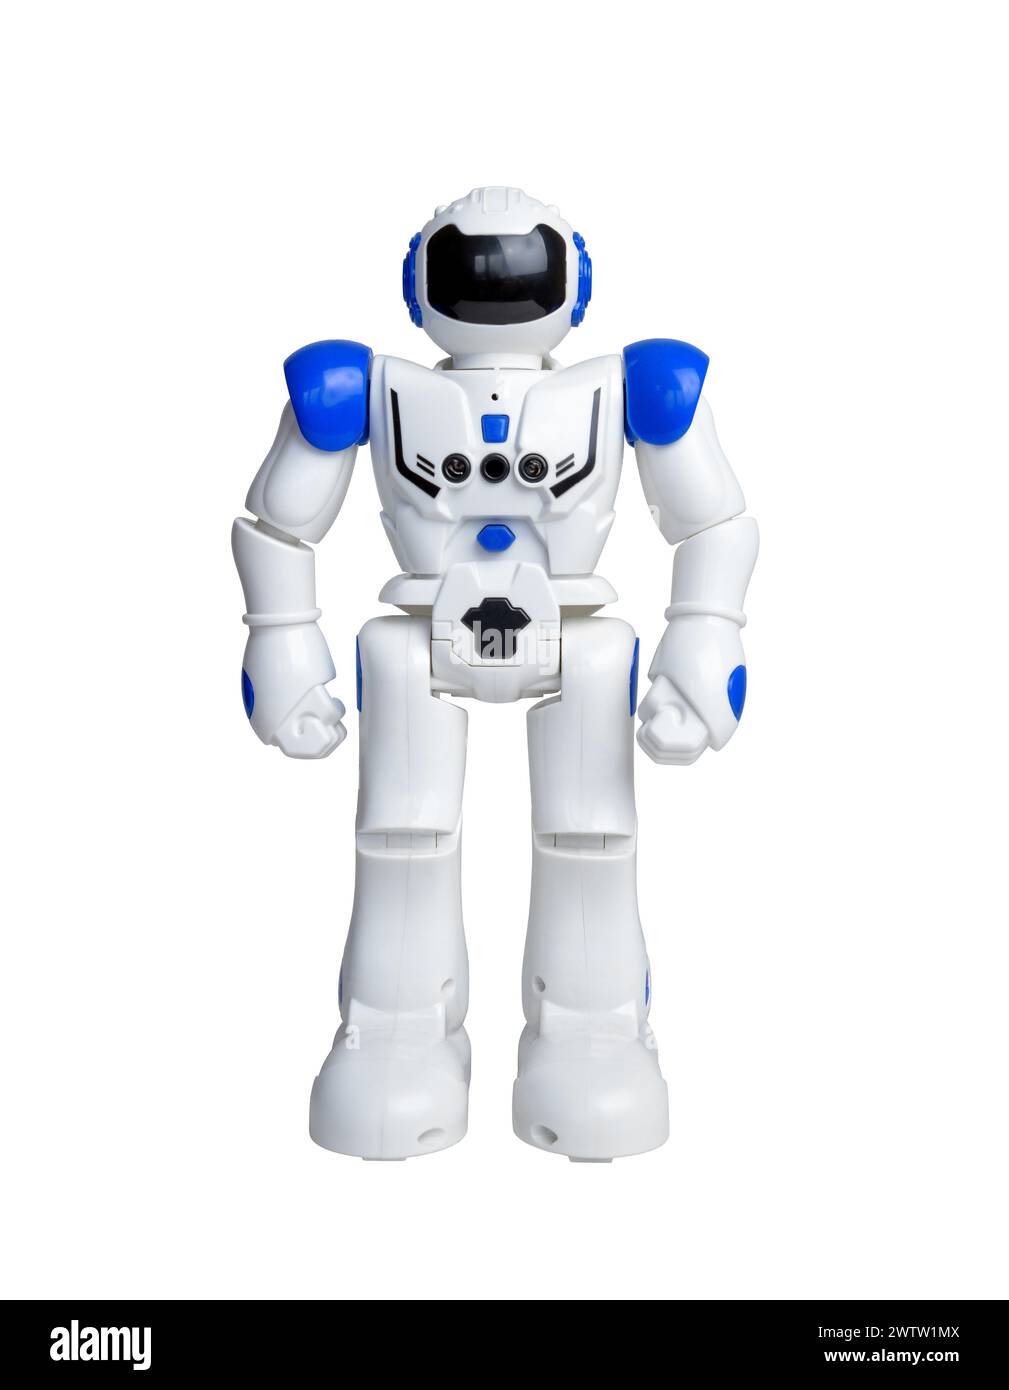 Isolated white robot with blue details and various sensors for movement and action Stock Photo